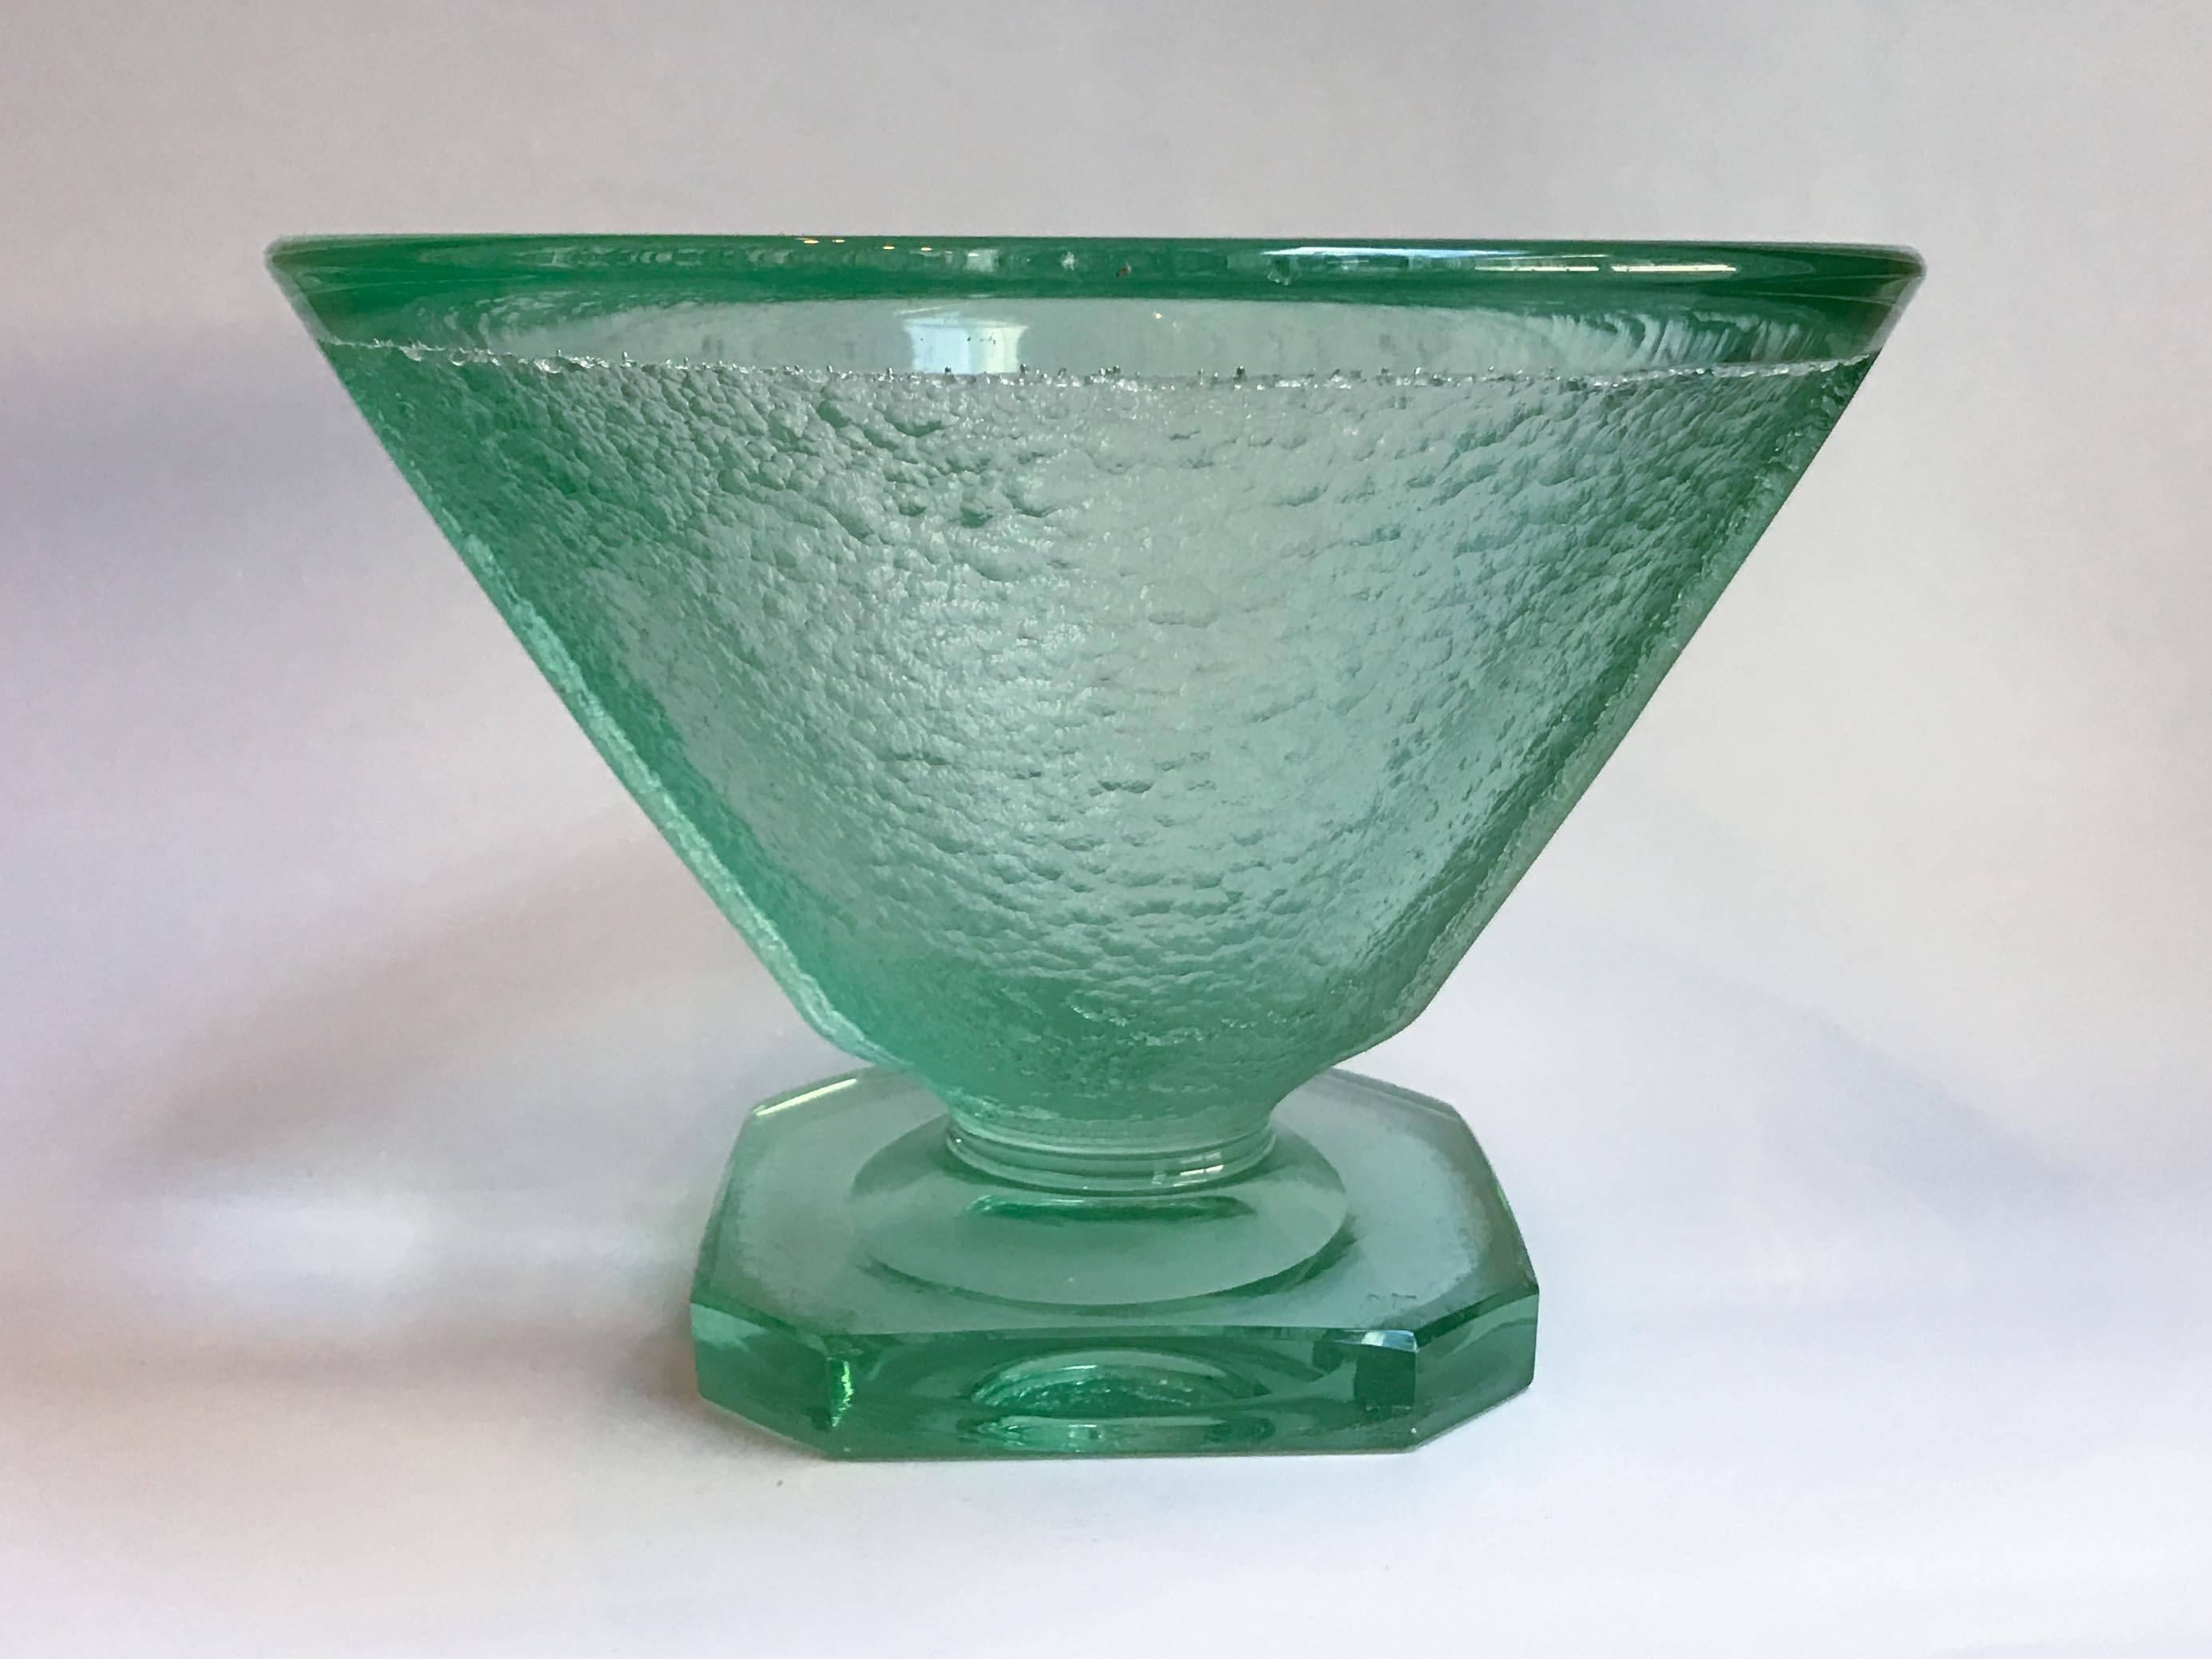 Thick green vessel on pedestal, unsigned, attributed to Daum, France.